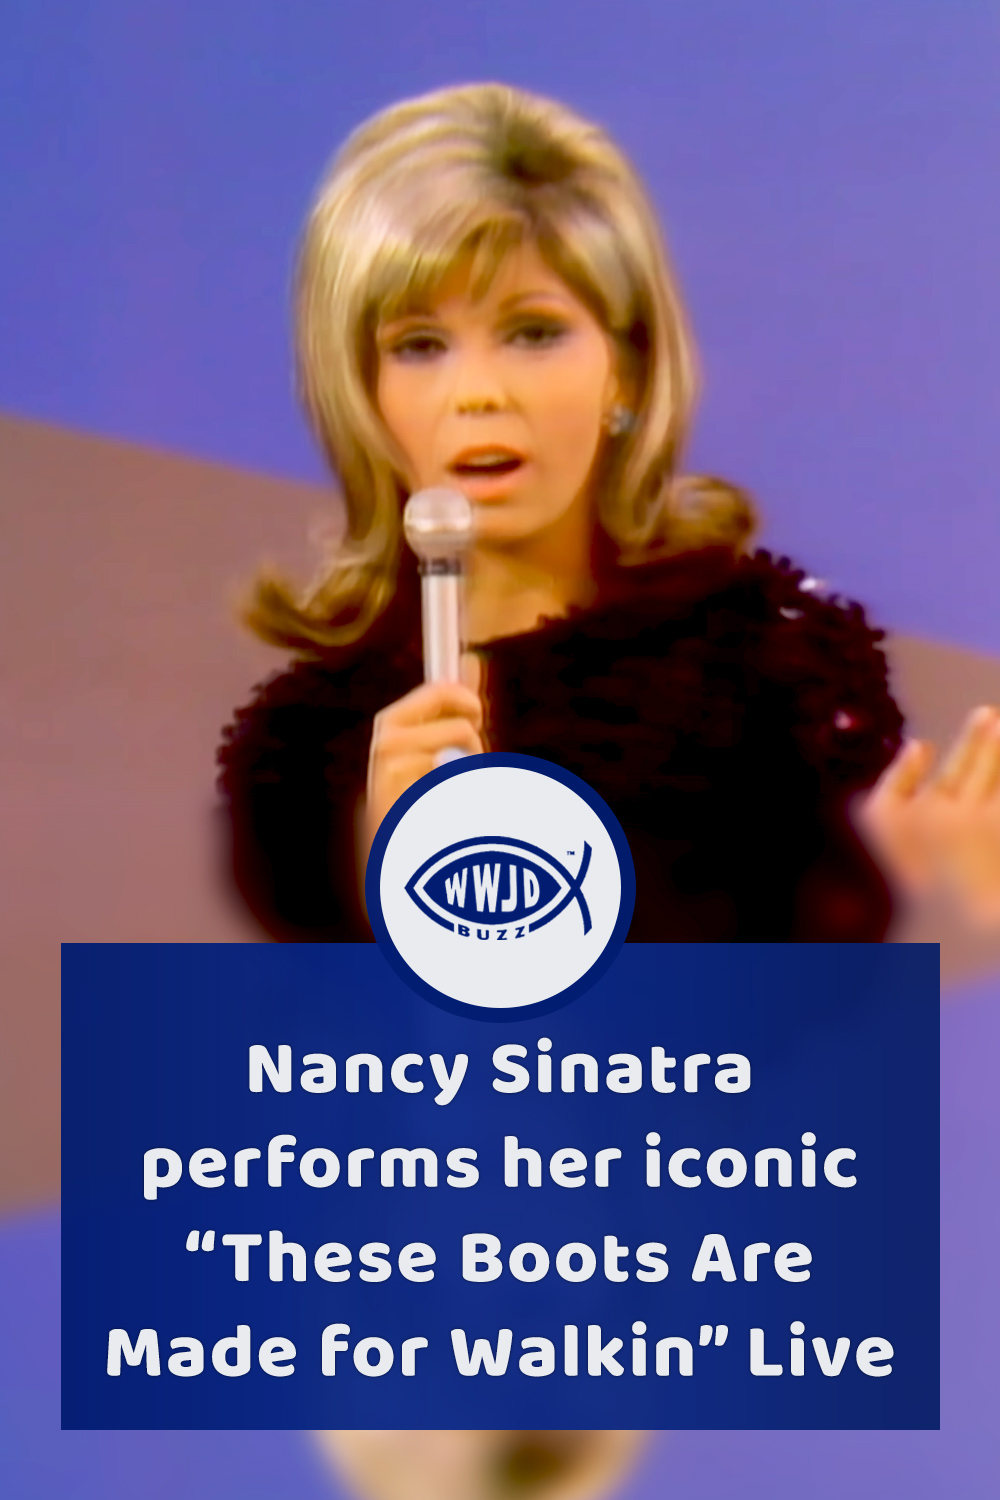 Nancy Sinatra performs her iconic “These Boots Are Made for Walkin” Live